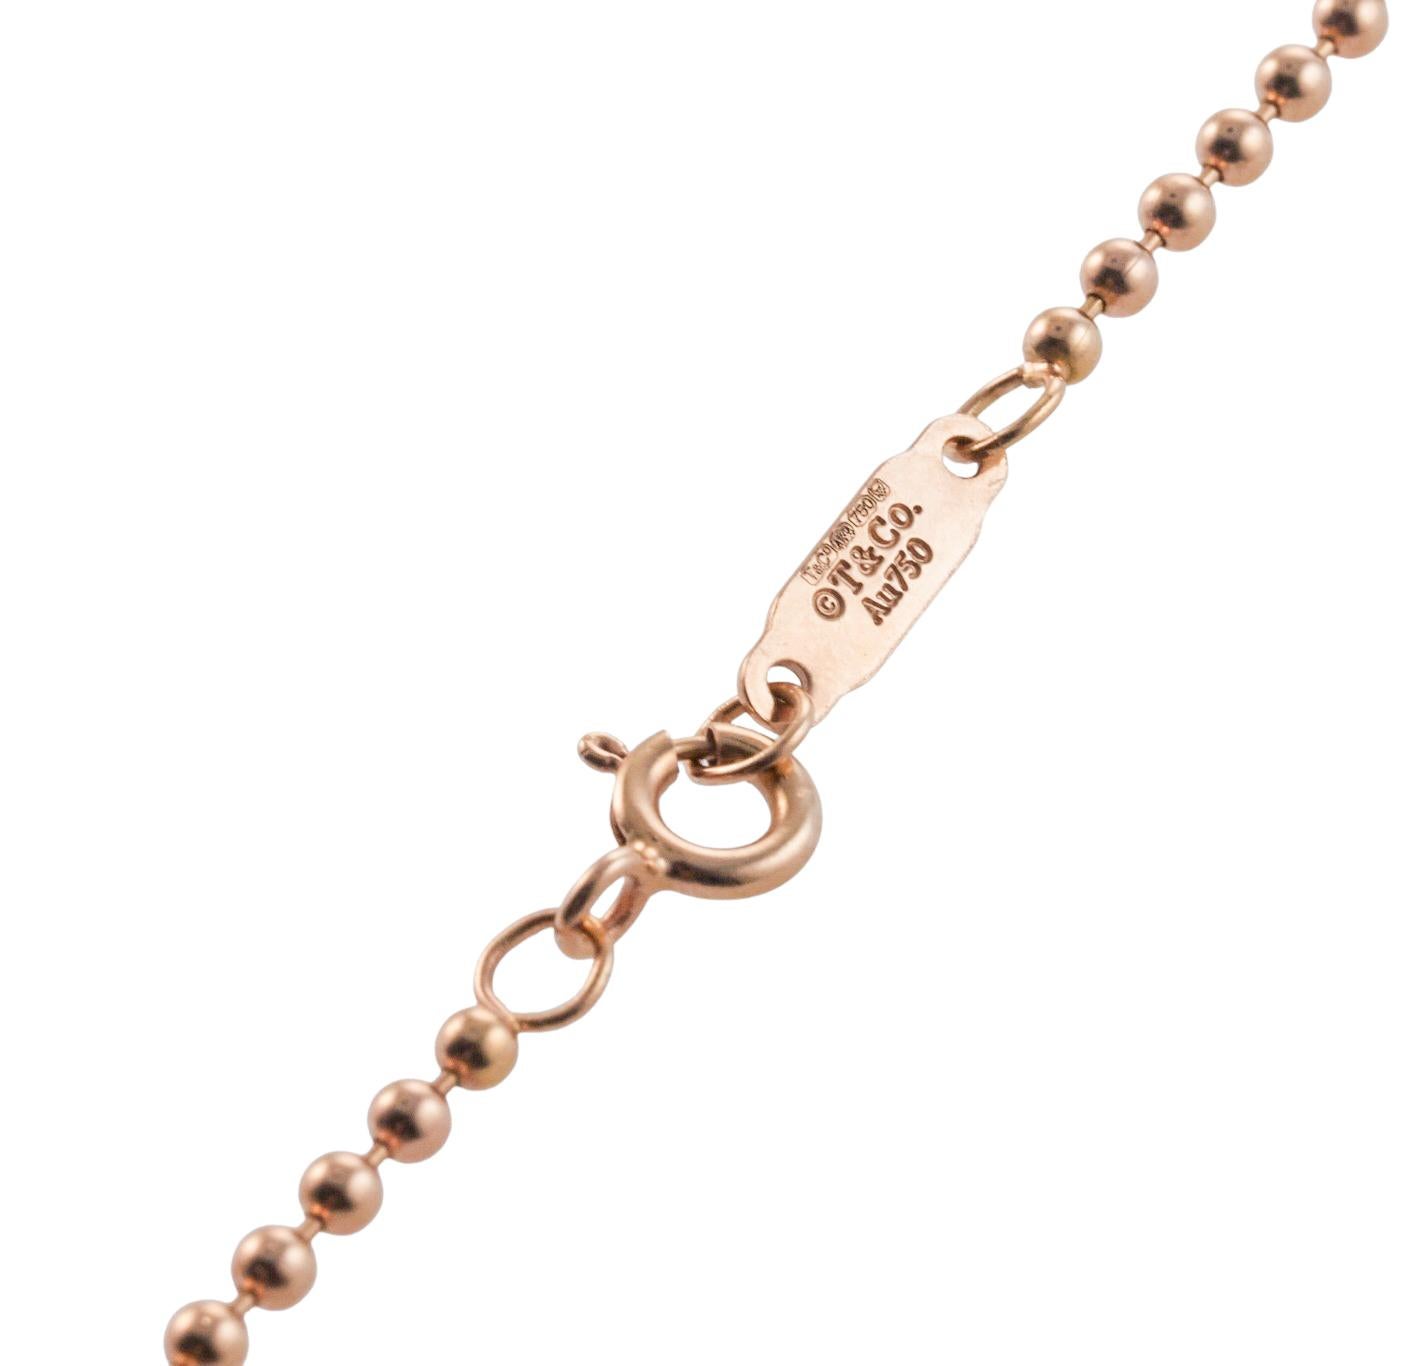 Tiffany & Co Gold Bar Ball Chain Necklace Pendant In Excellent Condition For Sale In New York, NY